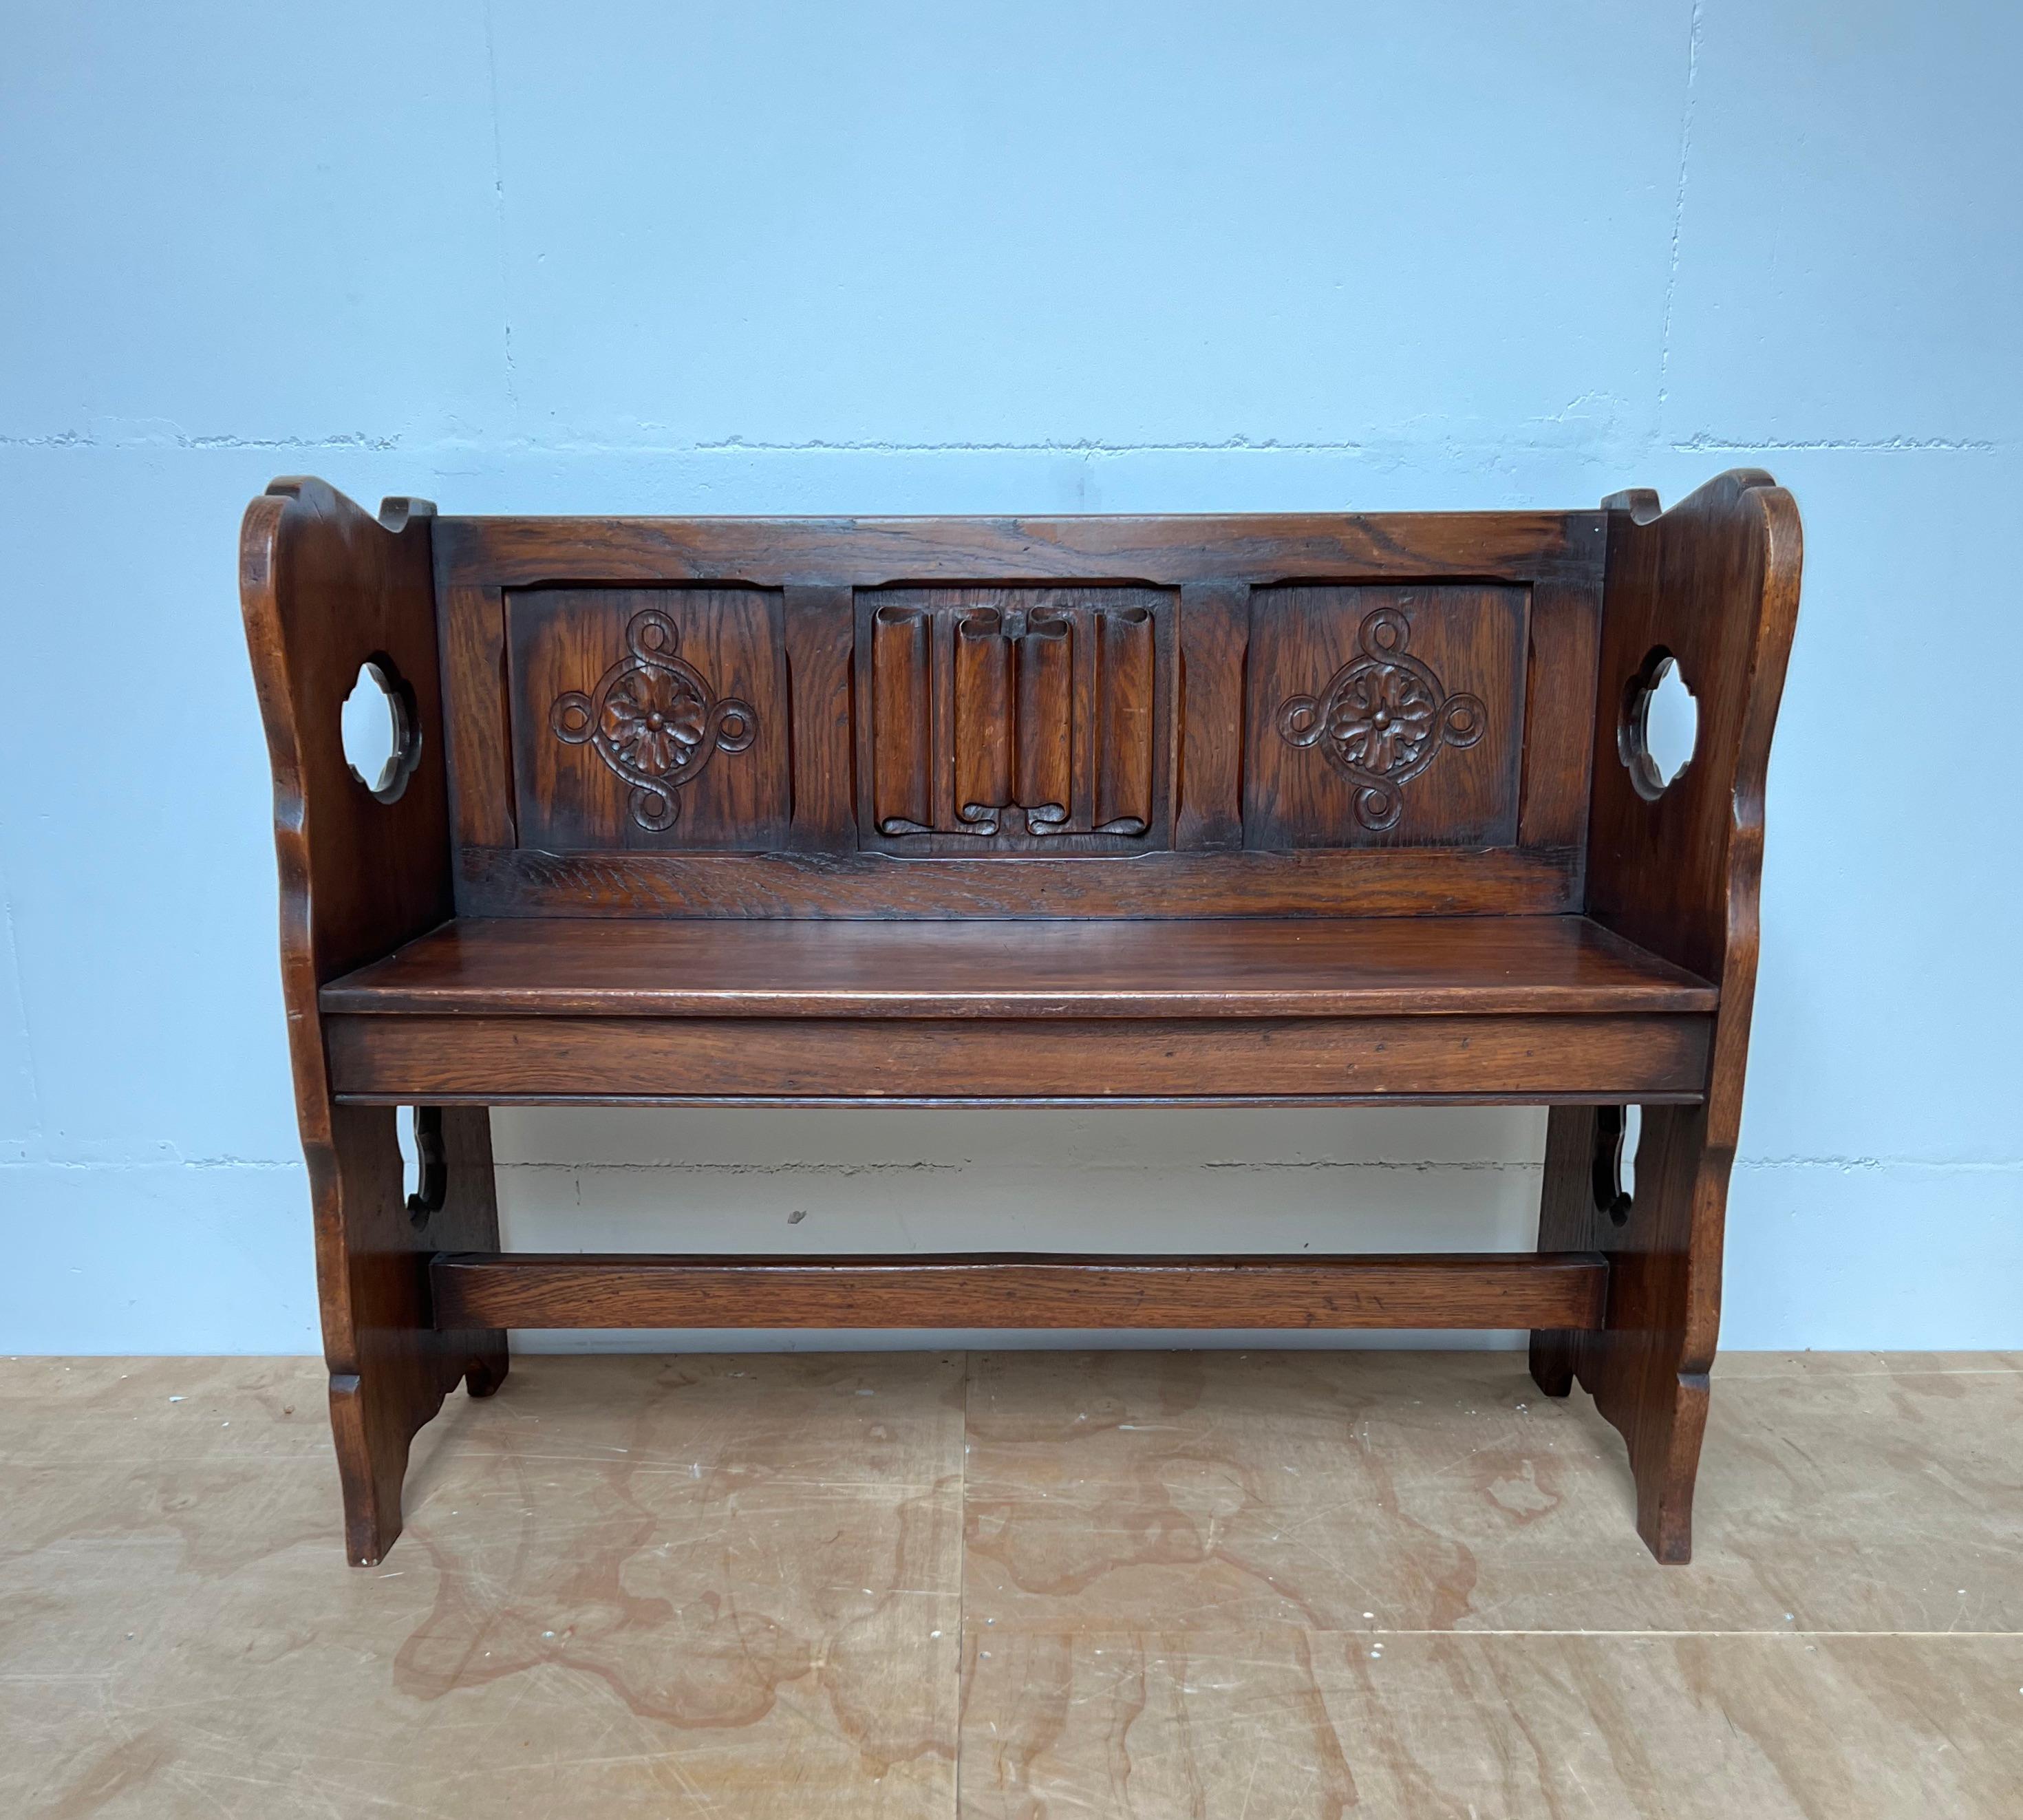 Rare Gothic bench with top quality carved, church letter panel and more.

This beautifully hand carved, oak church bench from the early 1900s is in amazing condition. It comes with top quality carved details including the hand carved quatrefoil